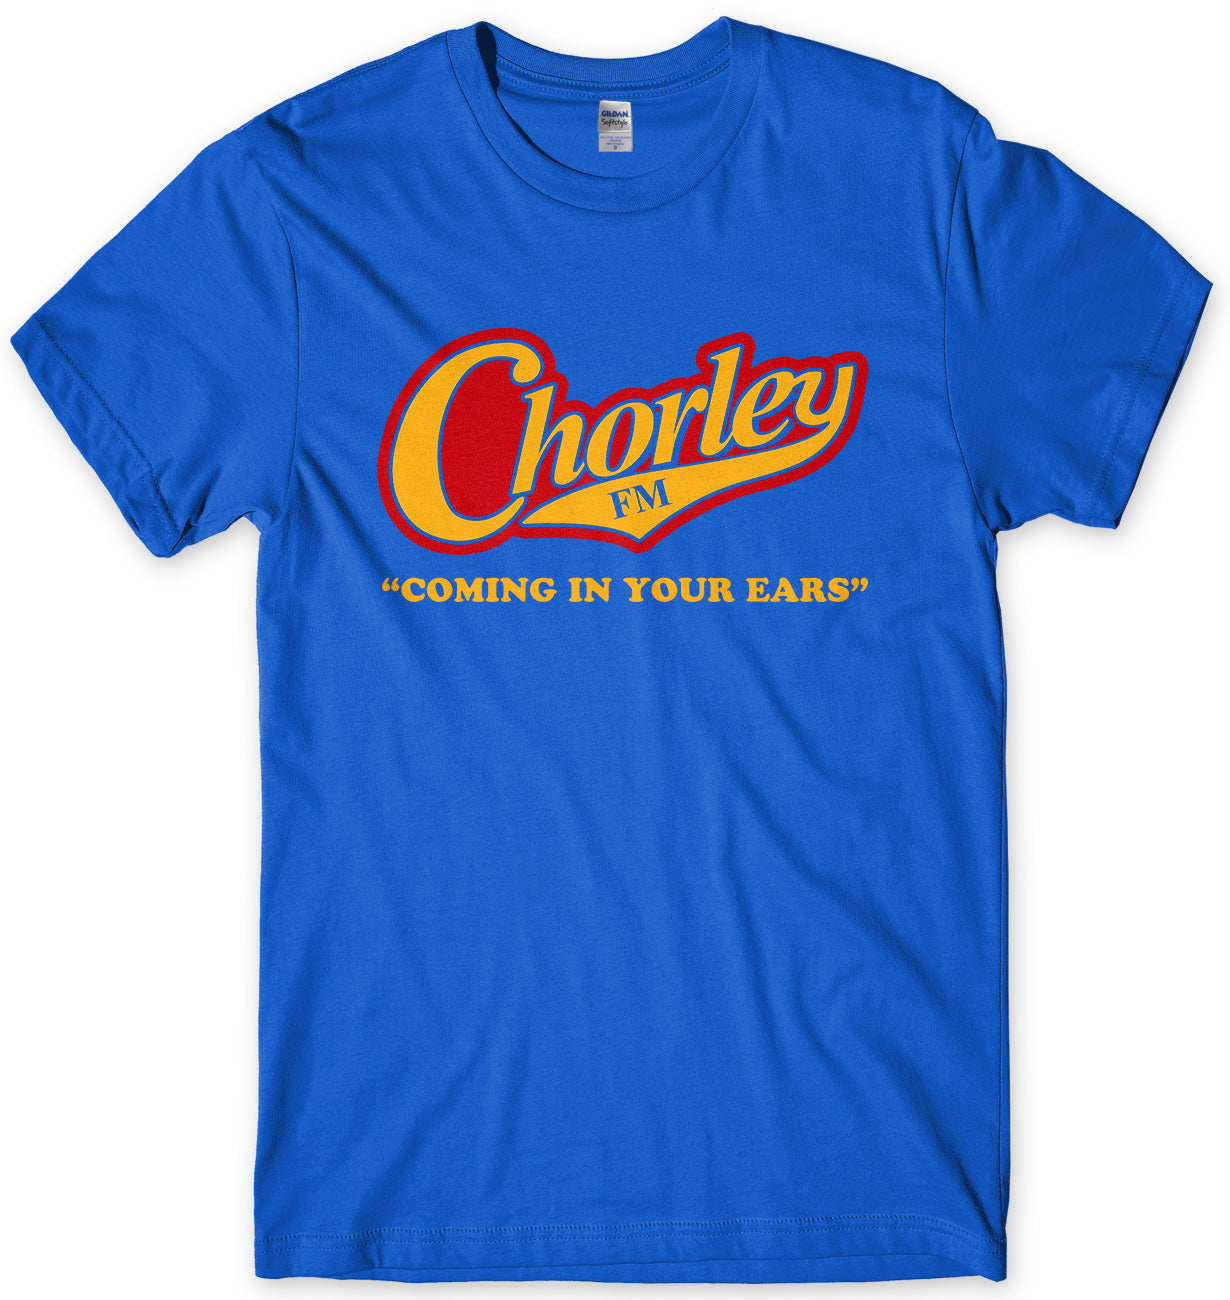 CHORLEY FM COMING IN YOUR EARS - INSPIRED BY PHOENIX NIGHTS MENS UNISEX T-SHIRT